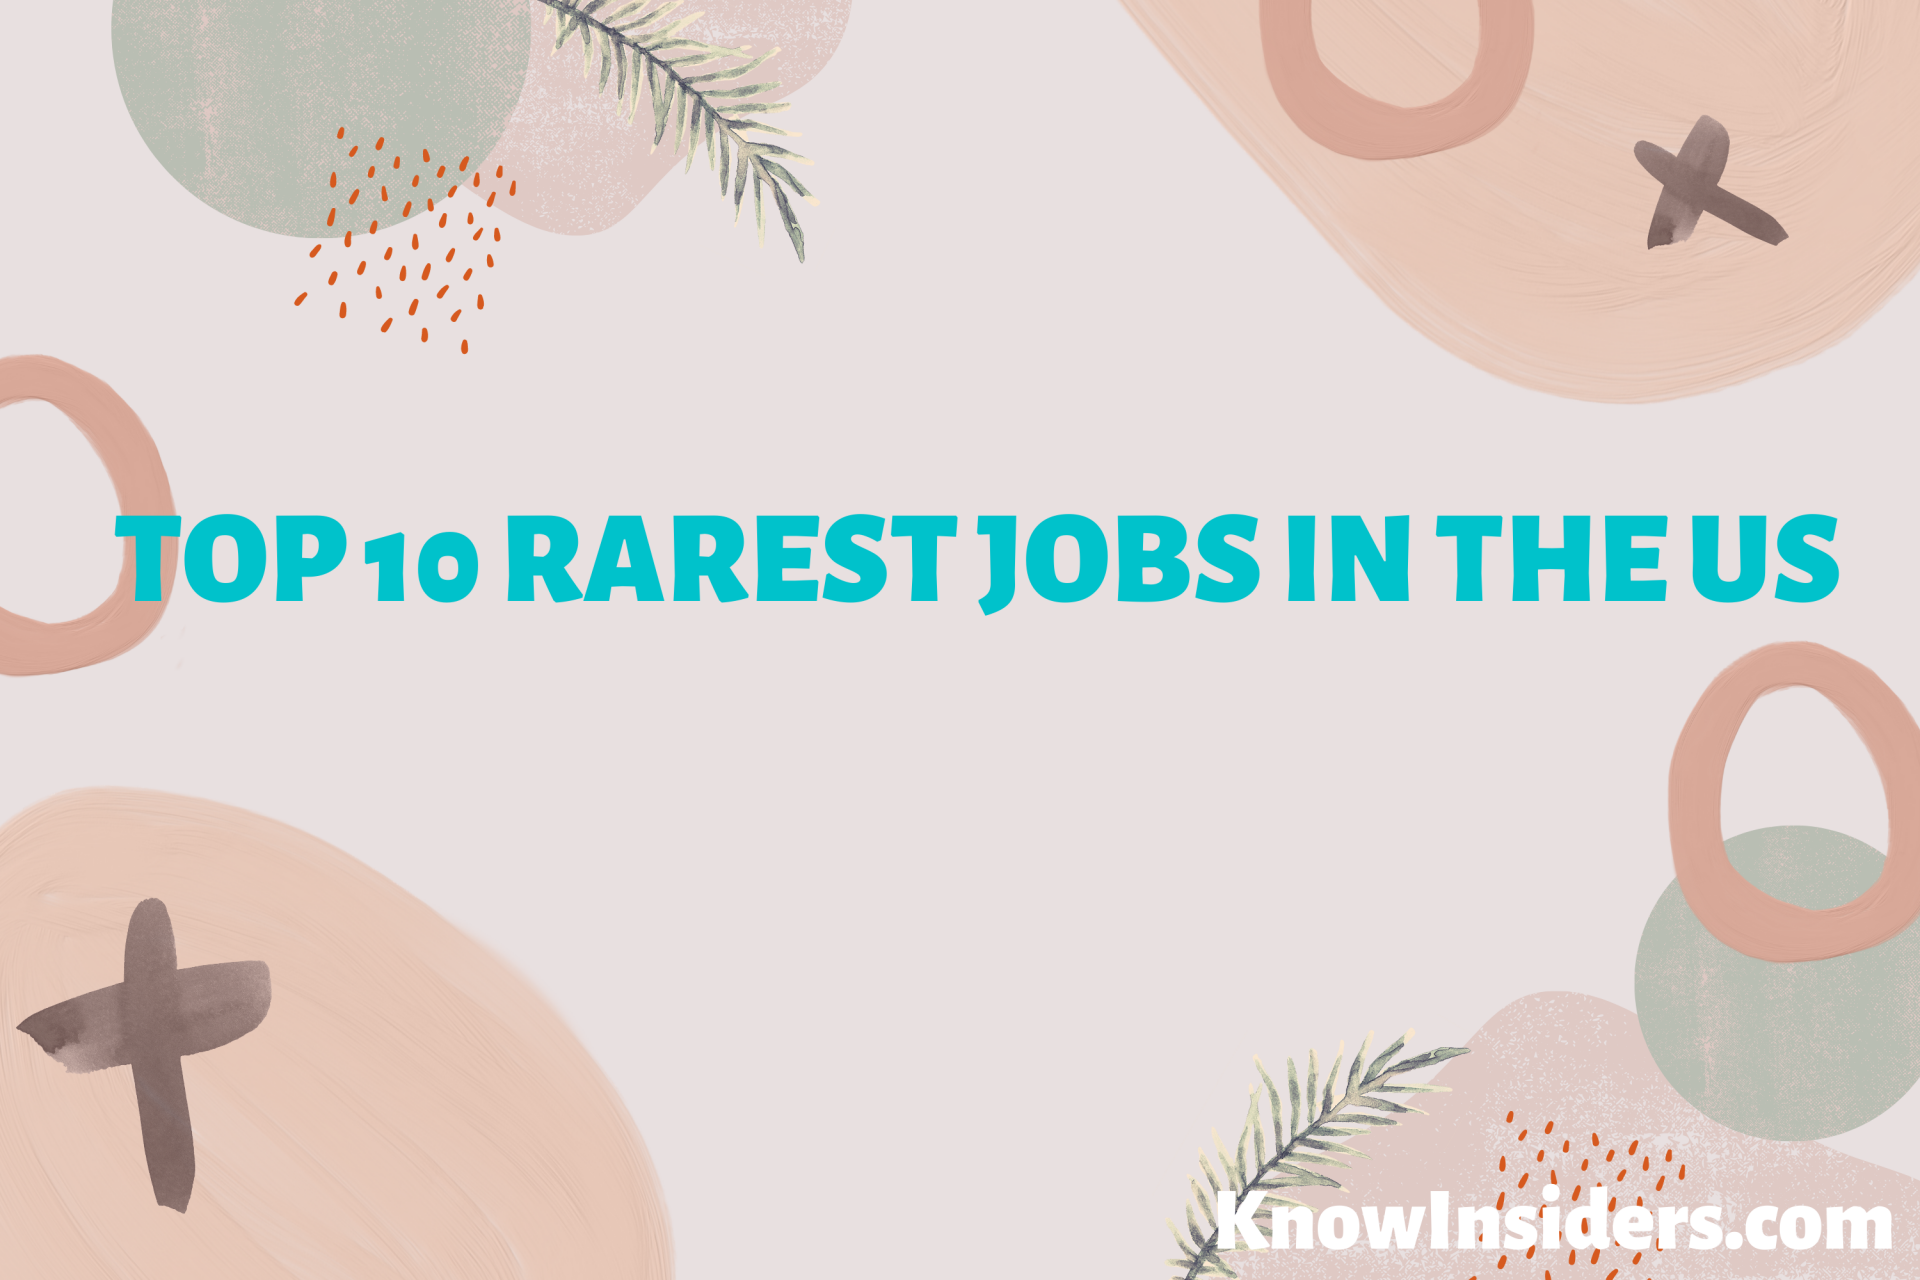 Top 10 Rarest Jobs in the US